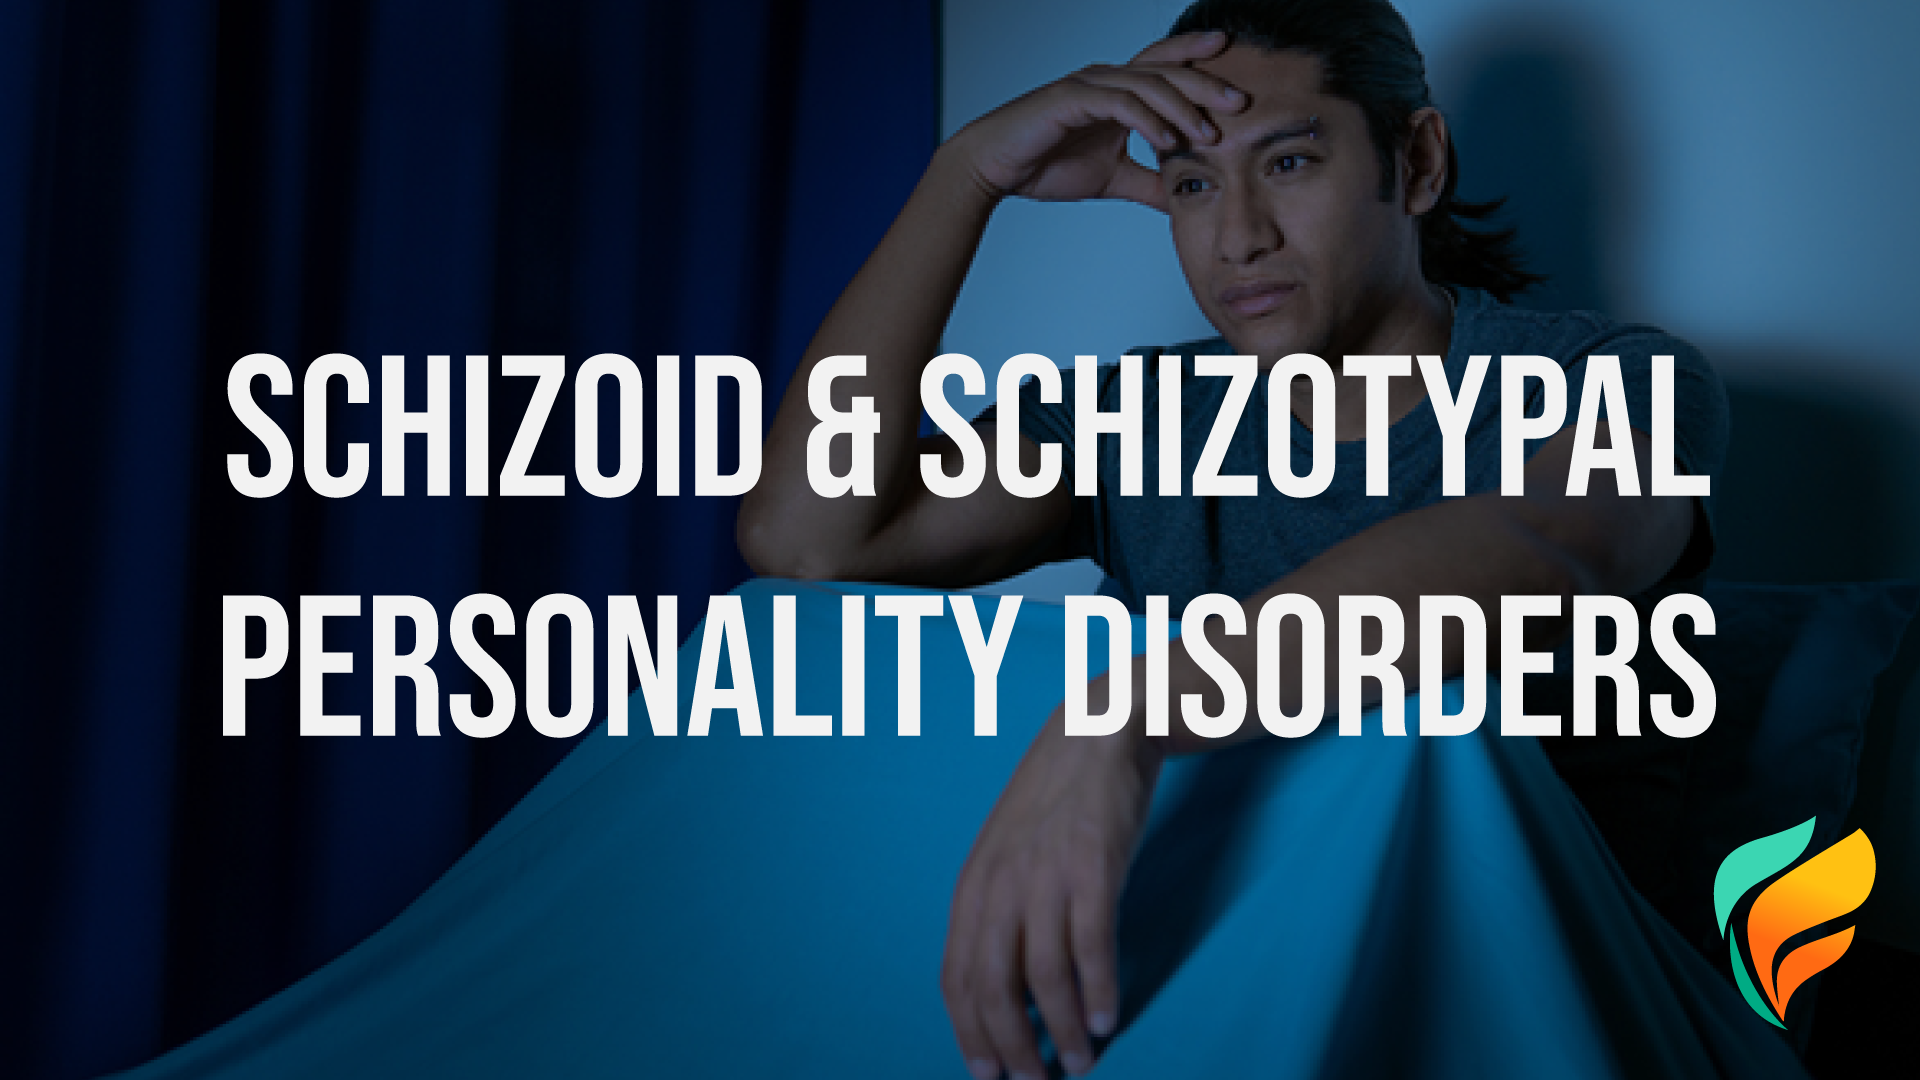 Schizoid and schizotypal personality disorders